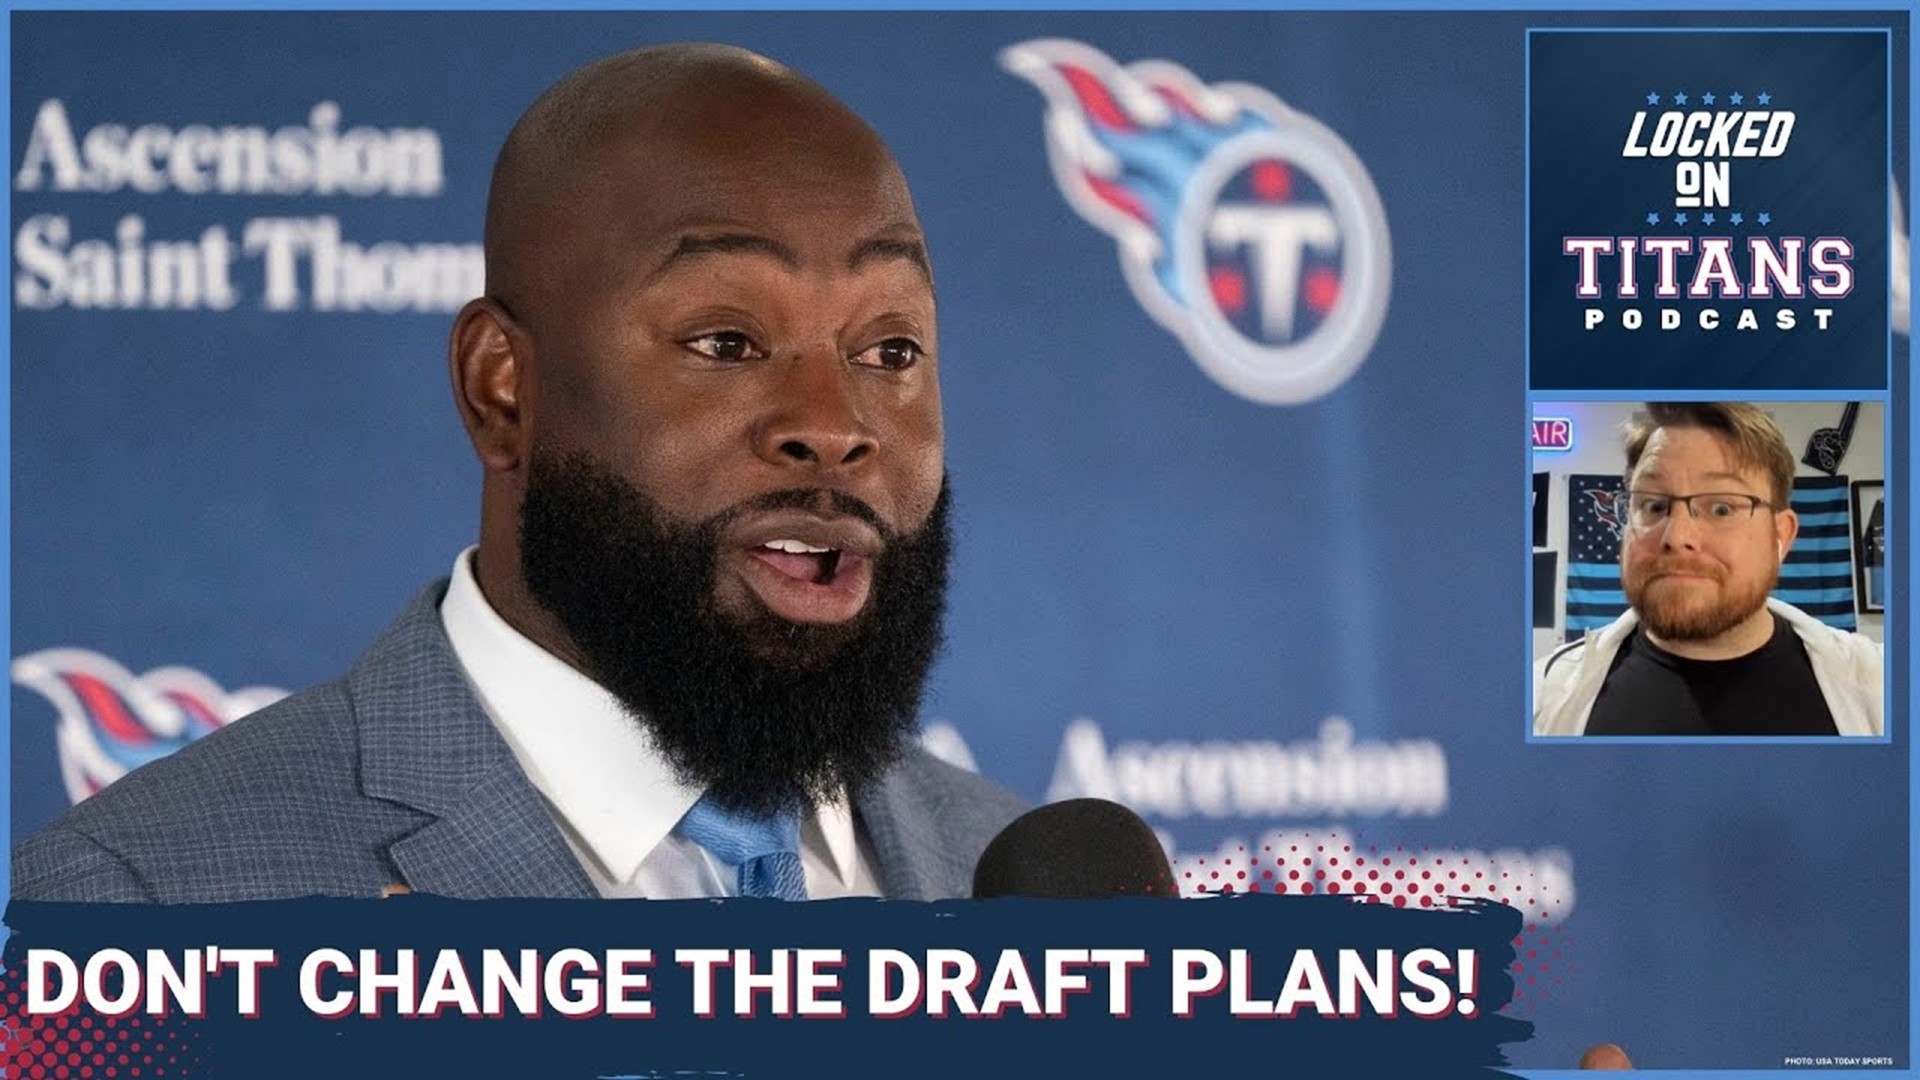 The Tennessee Titans have made six signings in free agency so far and brought back three players from 2022. None of those moves should have altered their draft